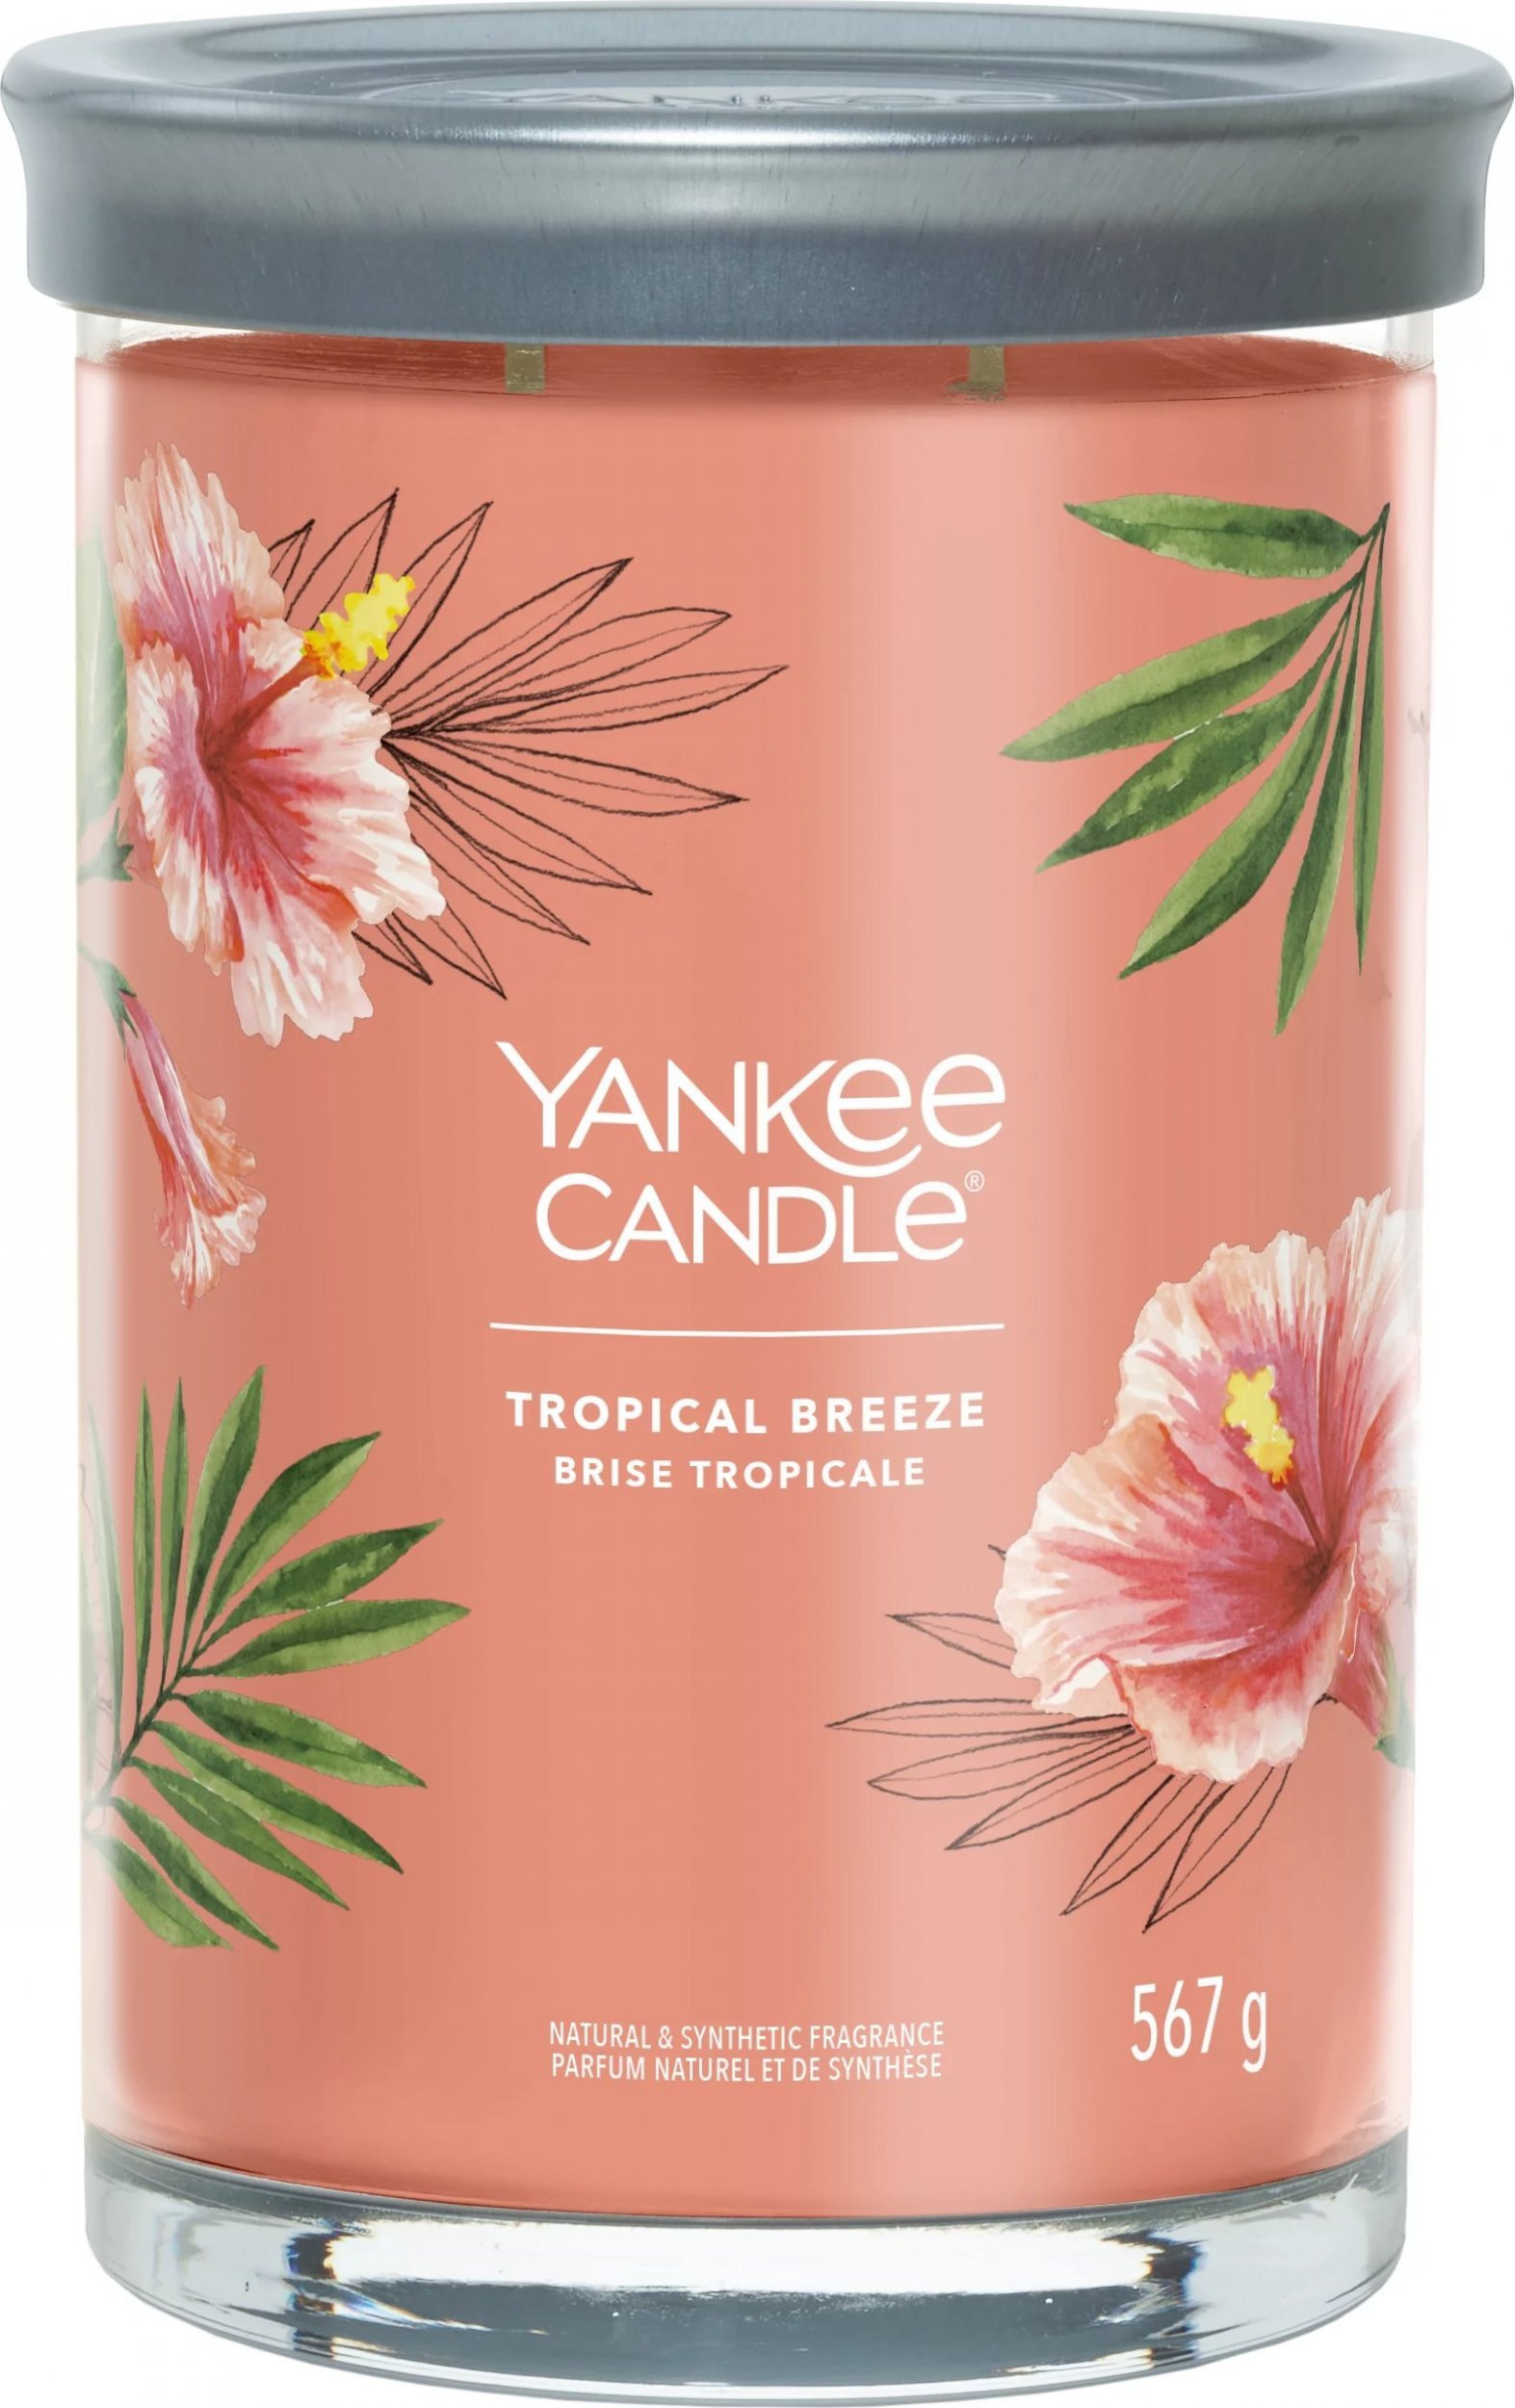 Yankee Candle Pahar Yankee Candle Signature Tropical Breeze 567g